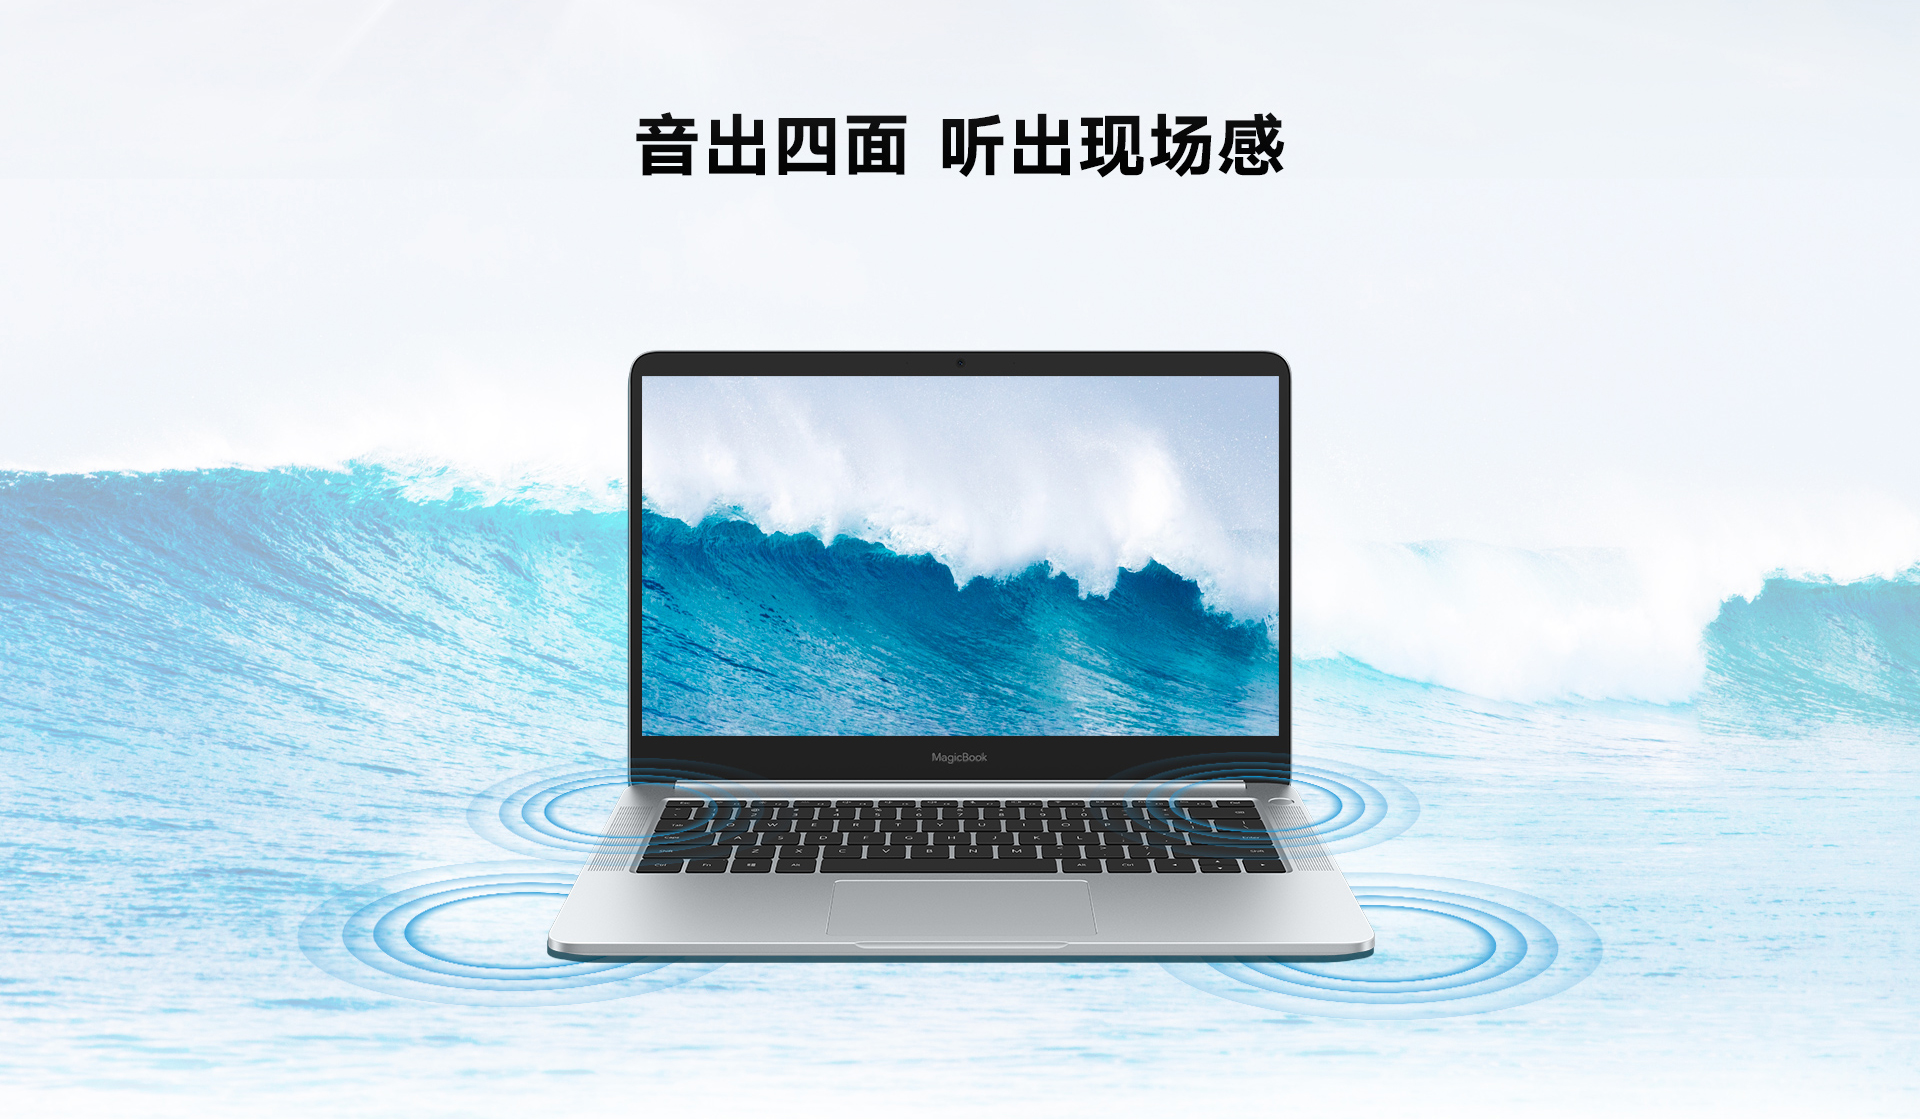 Magicbook pc manager. Ноутбук хонор 2019. Honor MAGICBOOK 14 2019. Ноутбук Huawei Honor MAGICBOOK 14. Ноутбук хонор Ryzen 7.